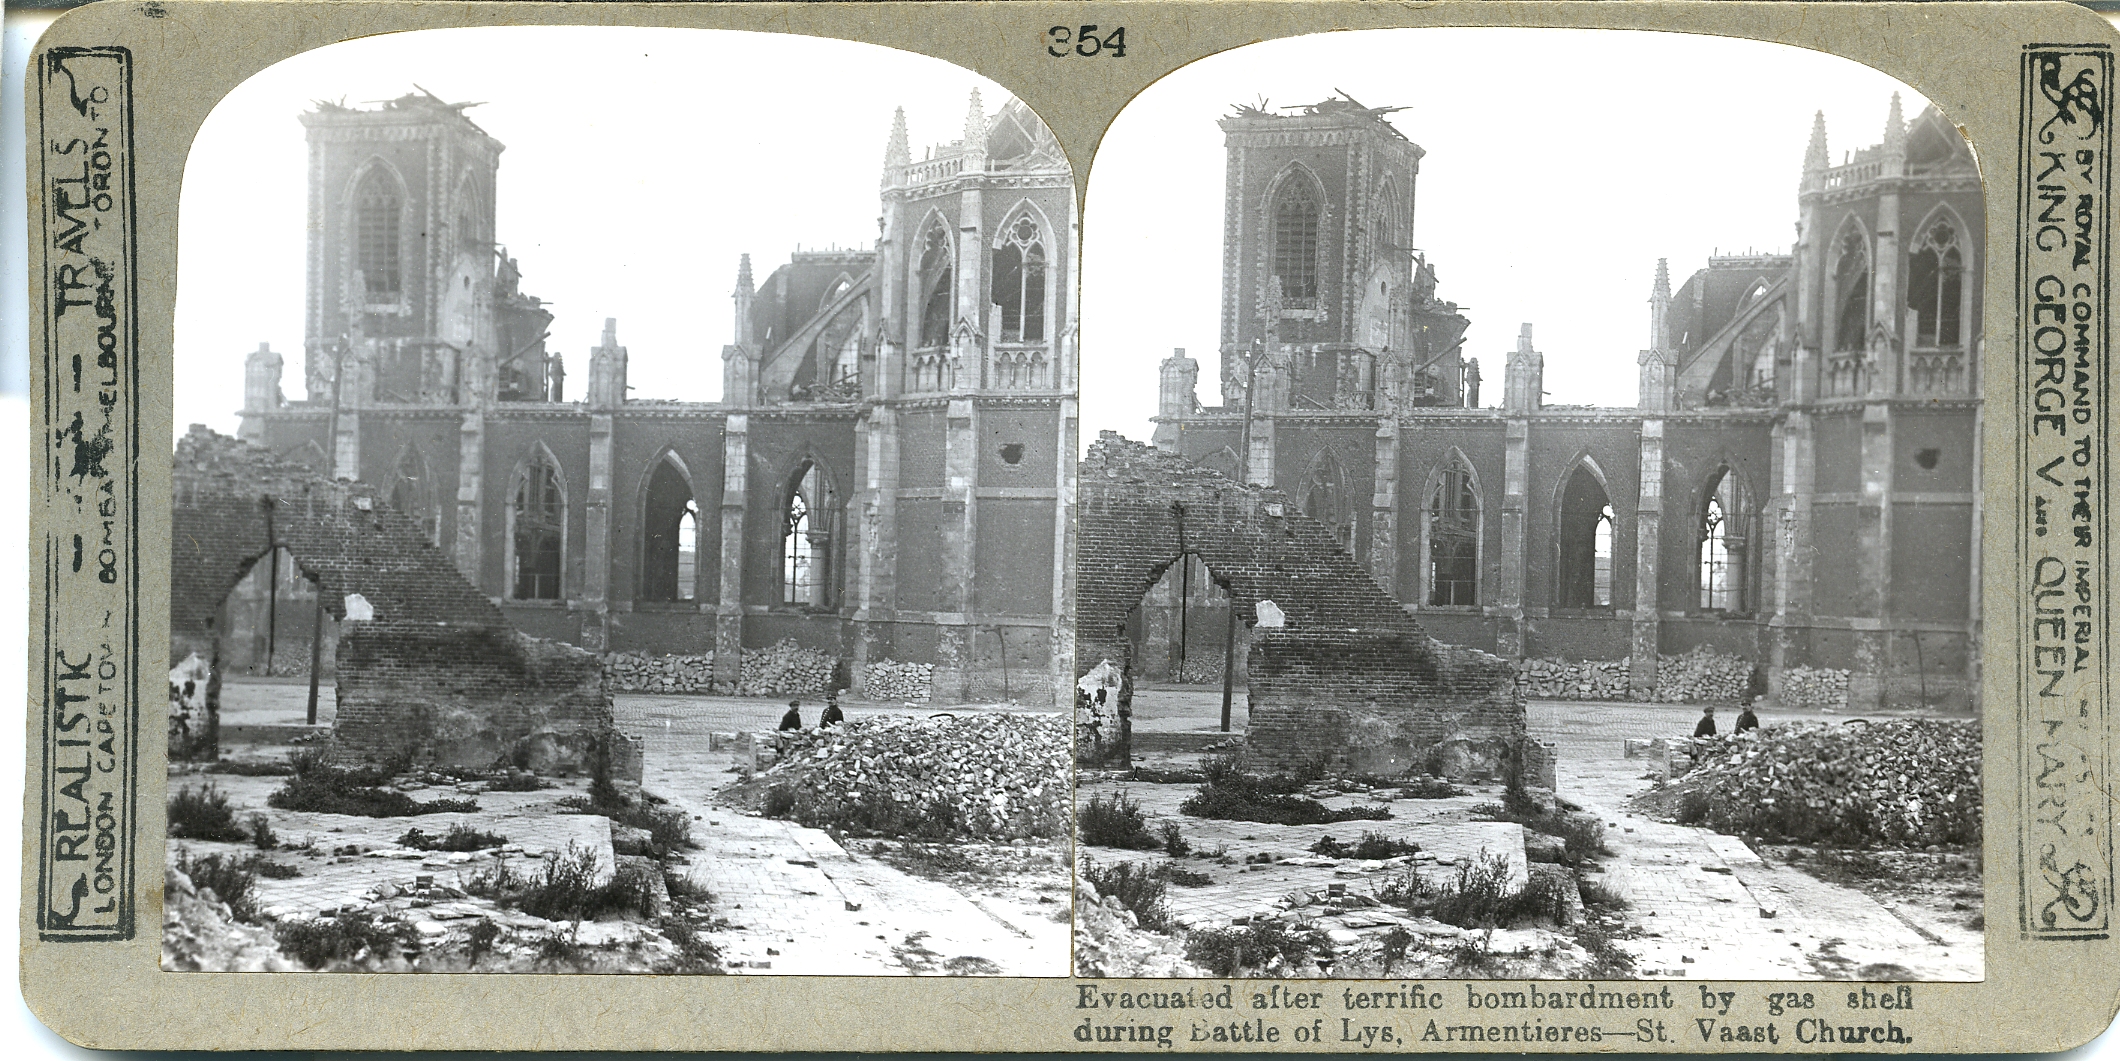 Evacuated after terrific bombardment by gas shell during Battle of Lys. Armentieres--St. Vaast Church